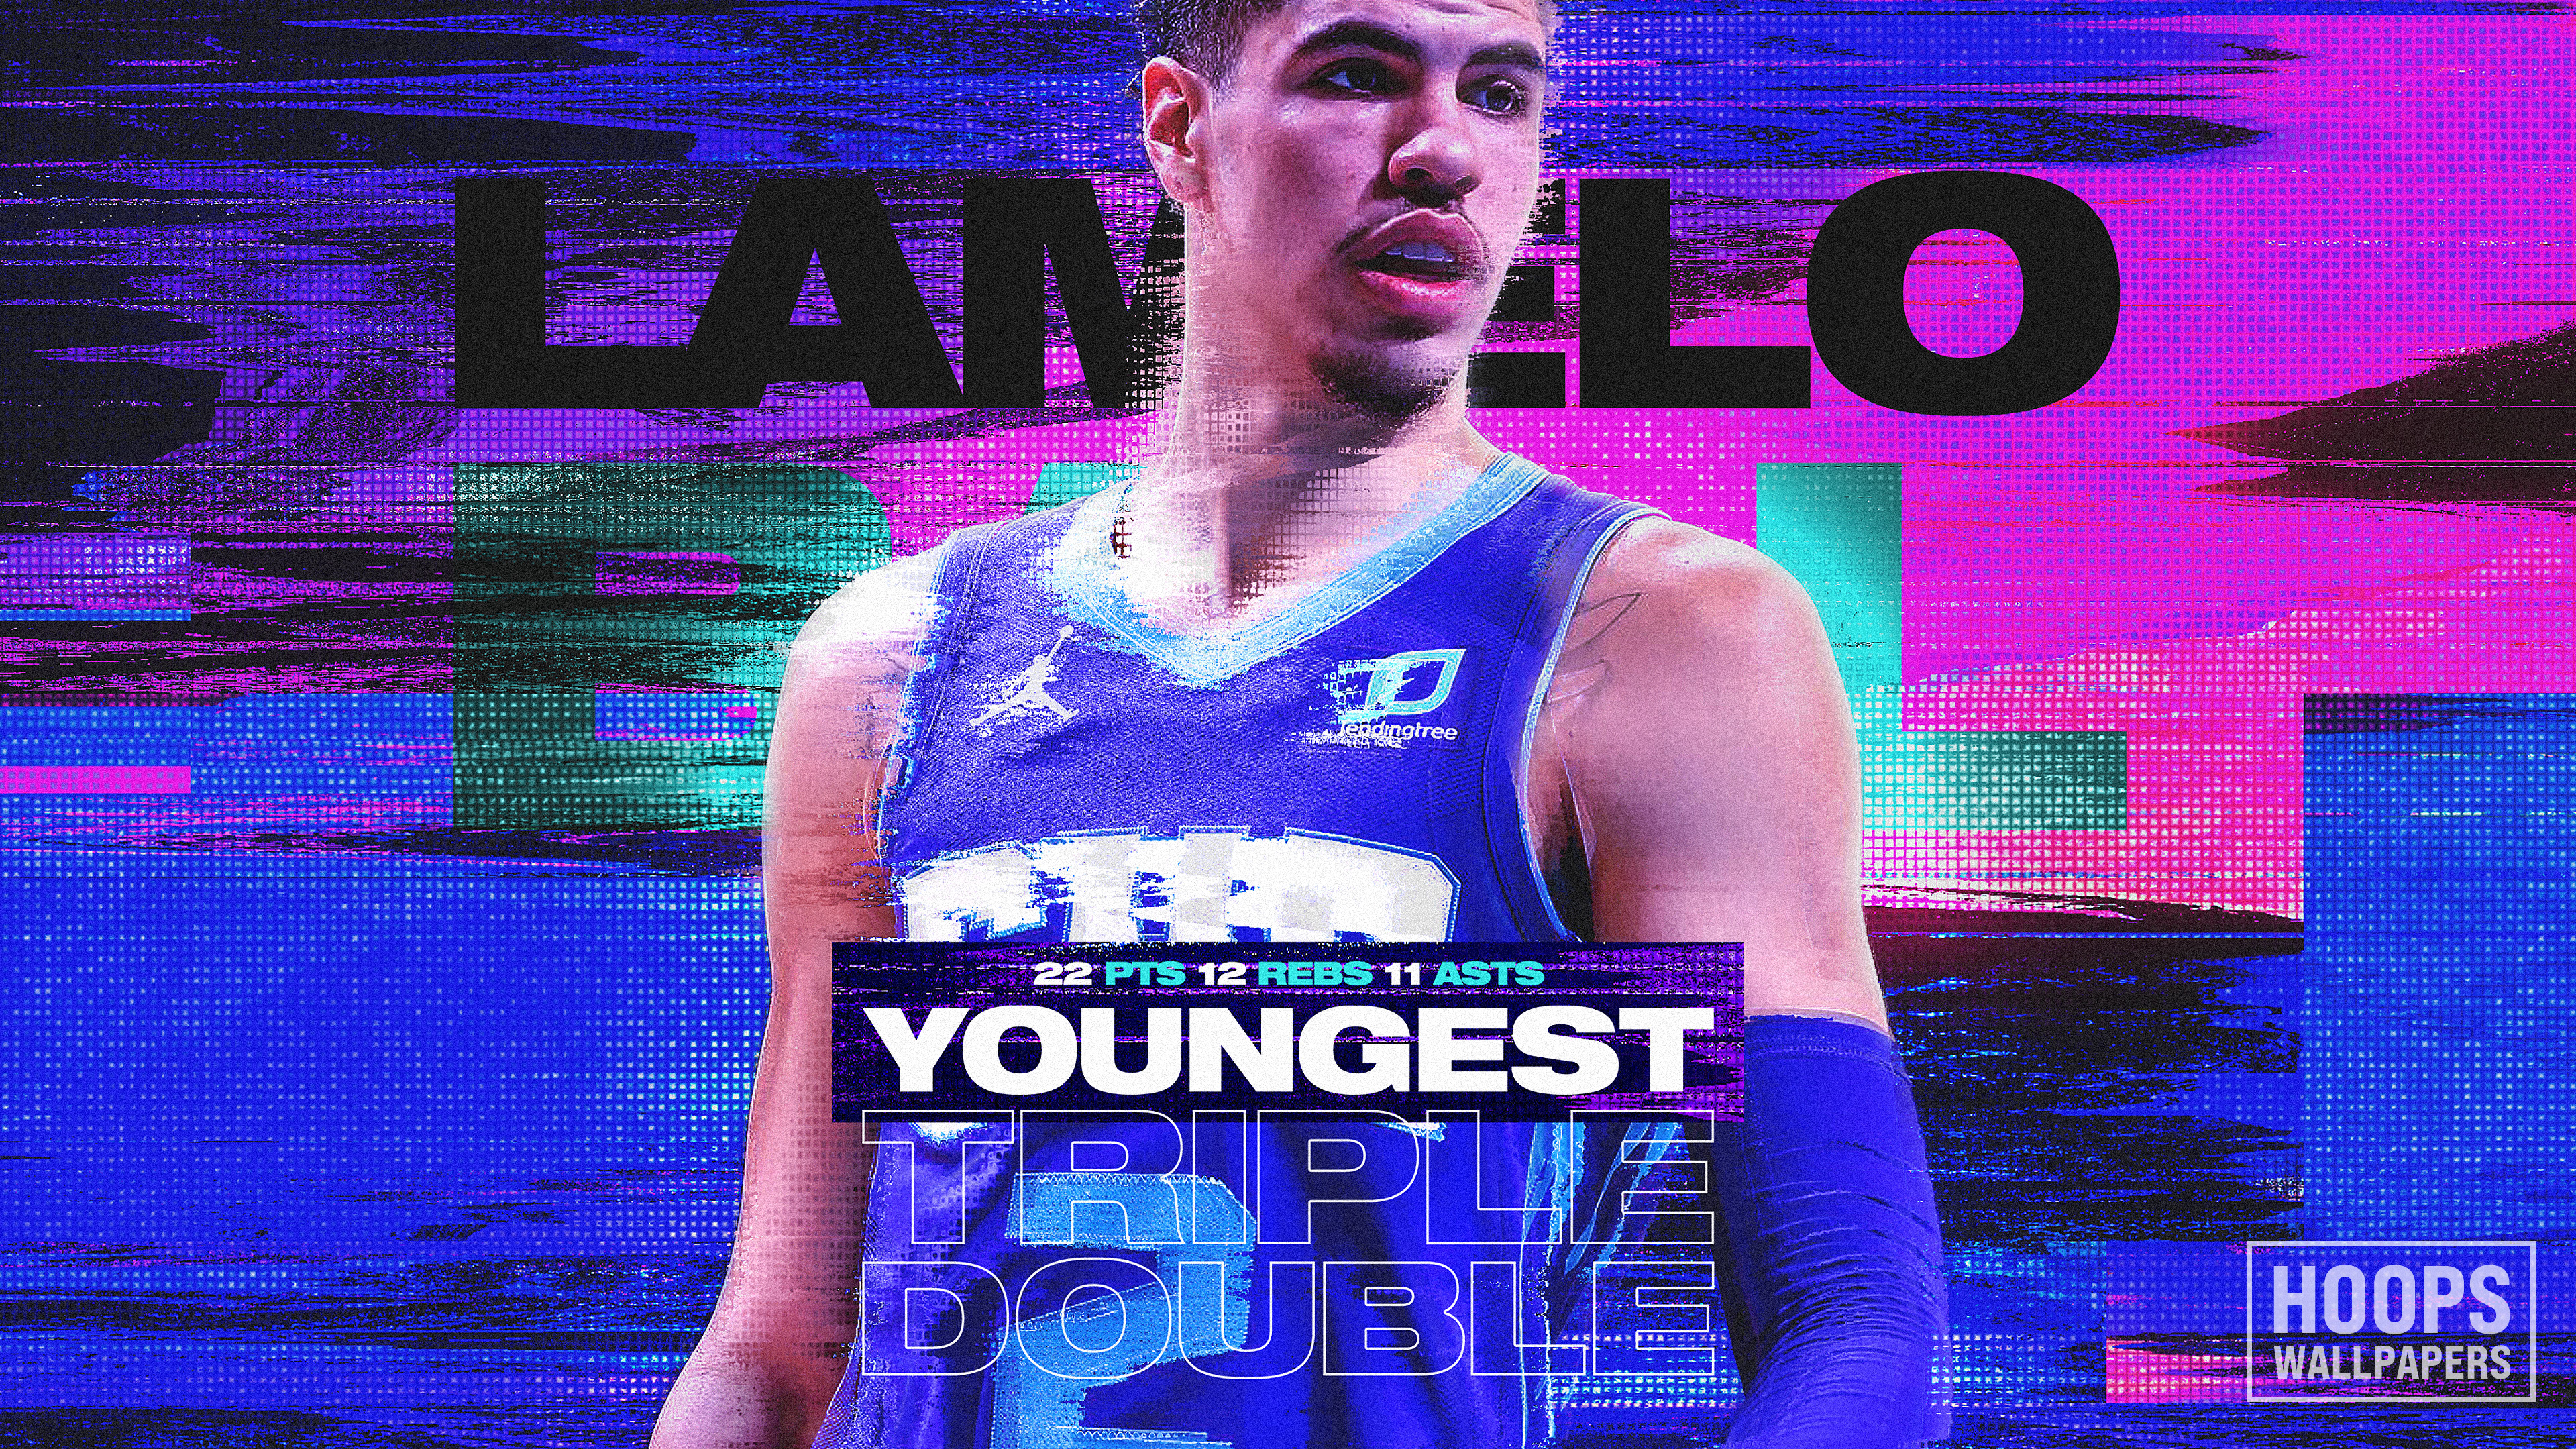 Hoopswallpapers Com Get The Latest Hd And Mobile Nba Wallpapers Today Blog Archive New Lamelo Ball Youngest Triple Double Wallpaper Hoopswallpapers Com Get The Latest Hd And Mobile Nba Wallpapers Today